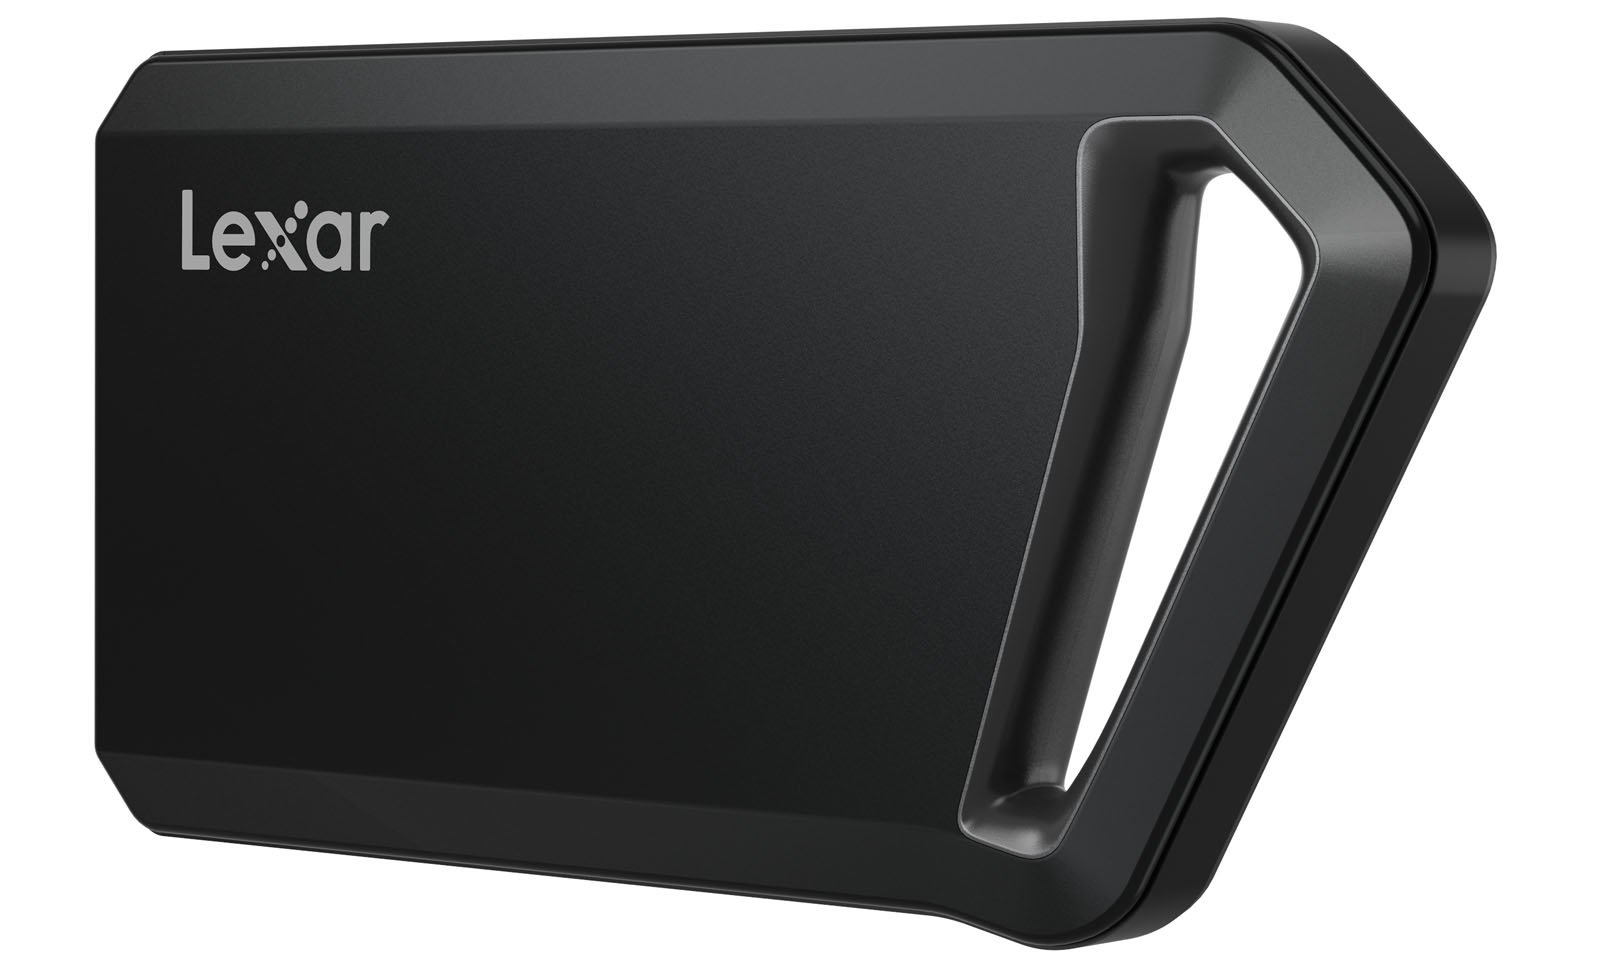 Lexar SL600 portable SSD for photographers and content creators